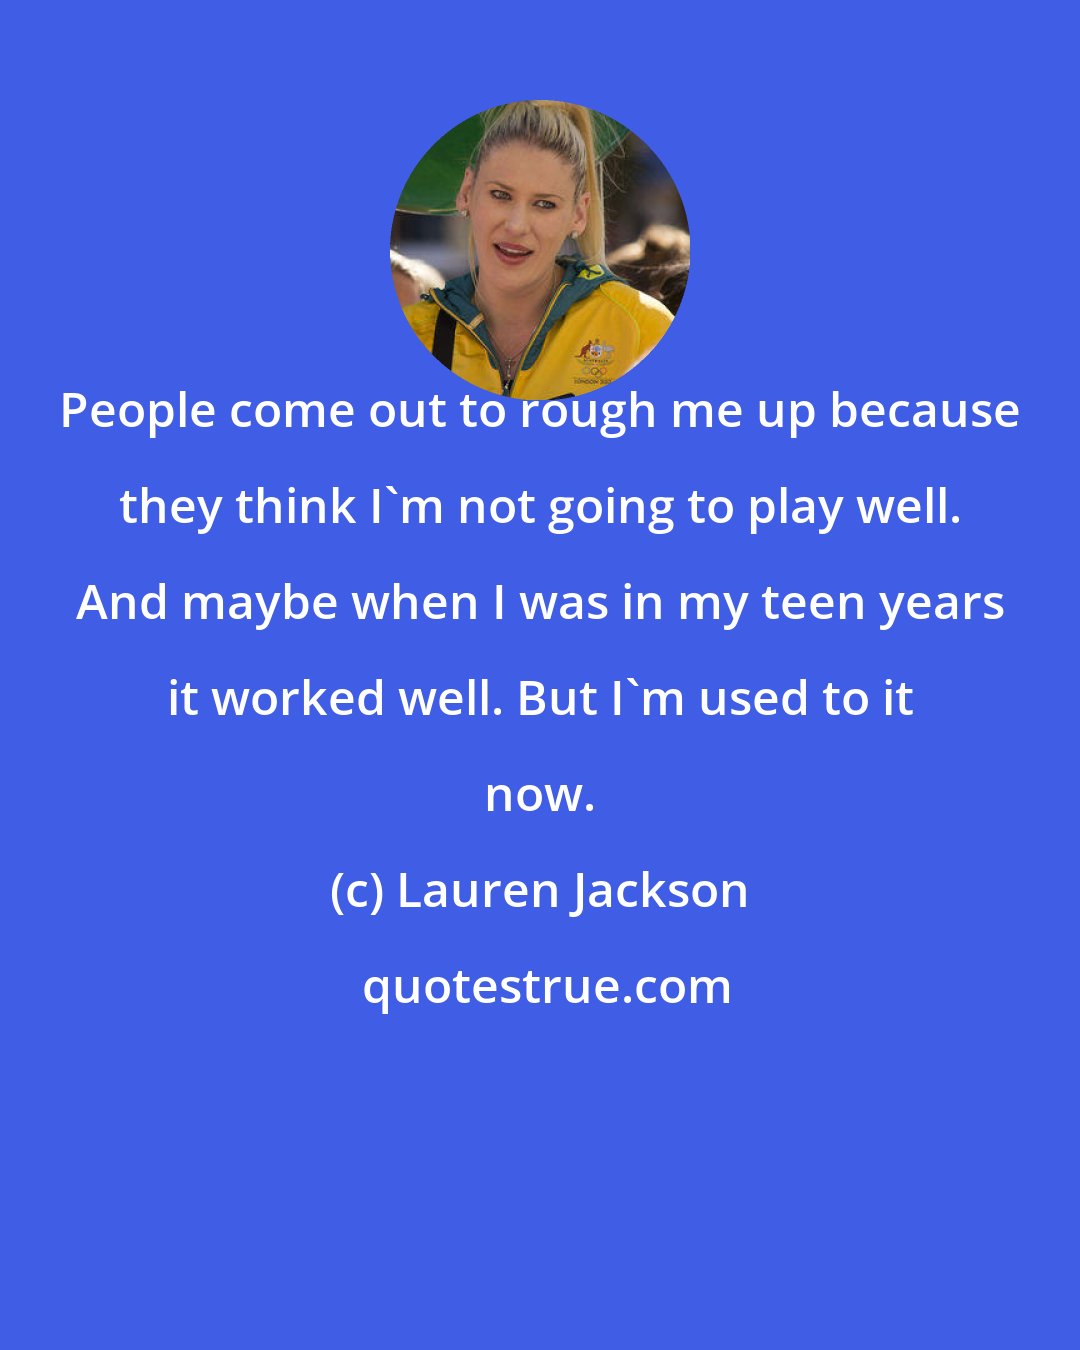 Lauren Jackson: People come out to rough me up because they think I'm not going to play well. And maybe when I was in my teen years it worked well. But I'm used to it now.